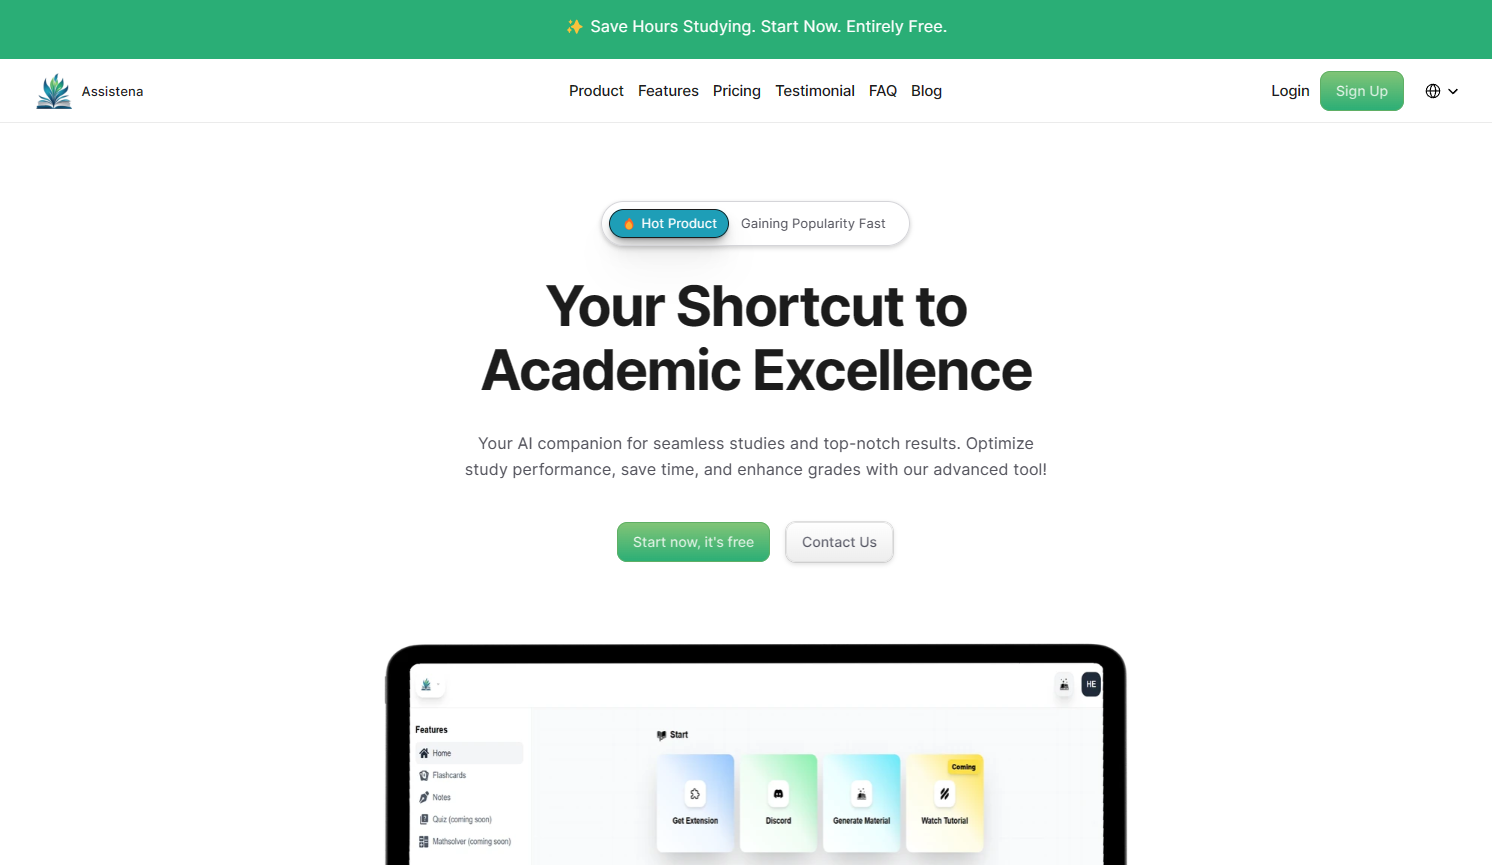 assistena - Your shortcut to academic excellence